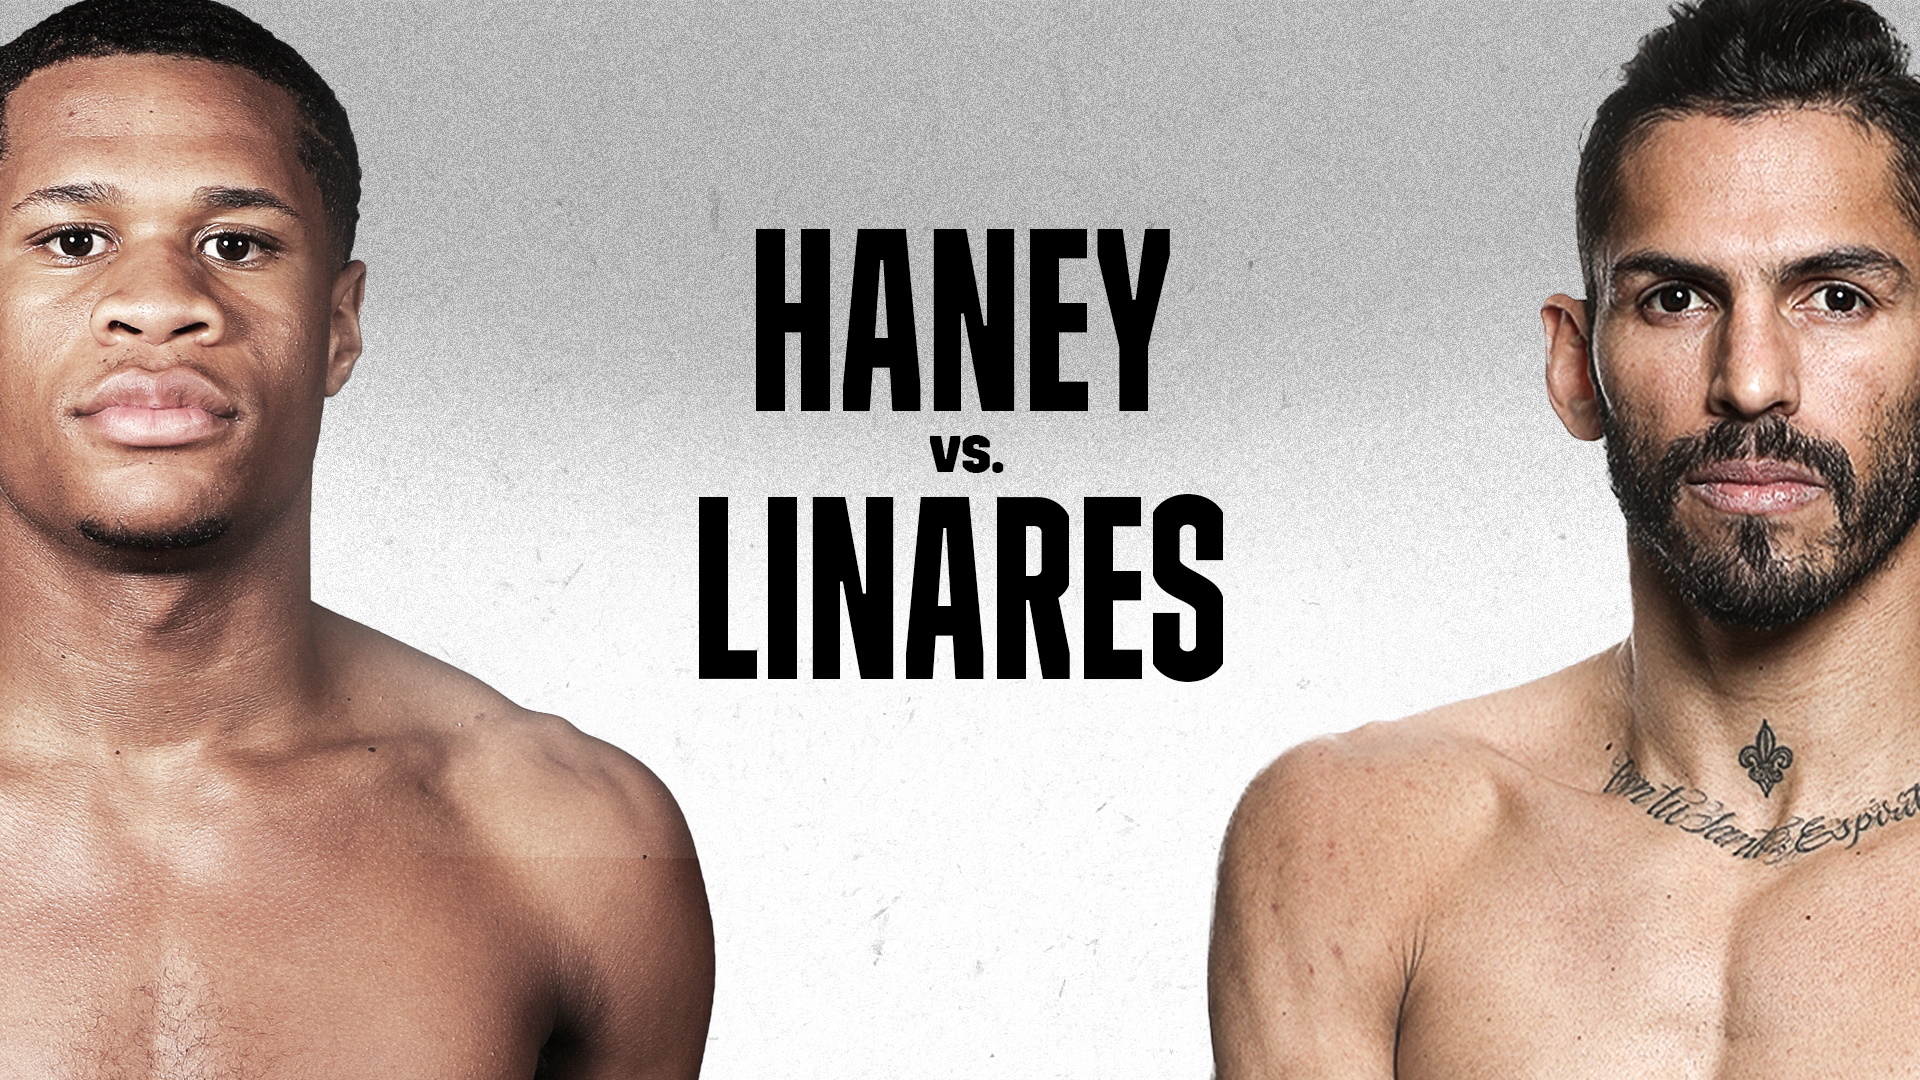 Haney vs Linares live stream how to watch title fight boxing from anywhere TechRadar